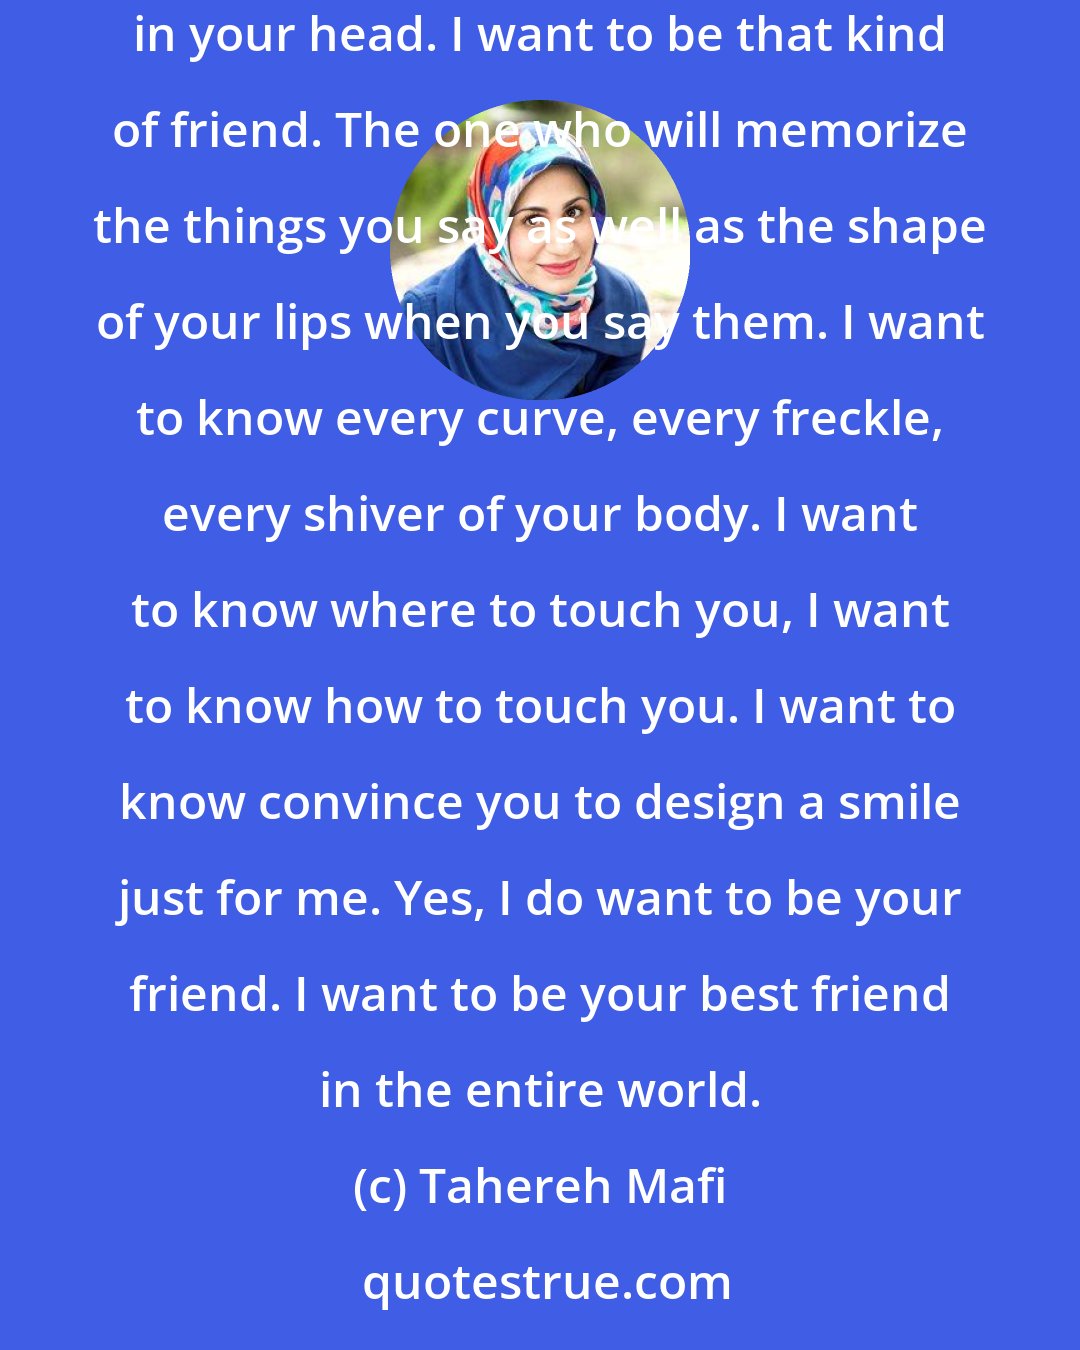 Tahereh Mafi: I want to be the friend you fall hopelessly in love with. The one you take into your arms and into your bed and into the private world you keep trapped in your head. I want to be that kind of friend. The one who will memorize the things you say as well as the shape of your lips when you say them. I want to know every curve, every freckle, every shiver of your body. I want to know where to touch you, I want to know how to touch you. I want to know convince you to design a smile just for me. Yes, I do want to be your friend. I want to be your best friend in the entire world.